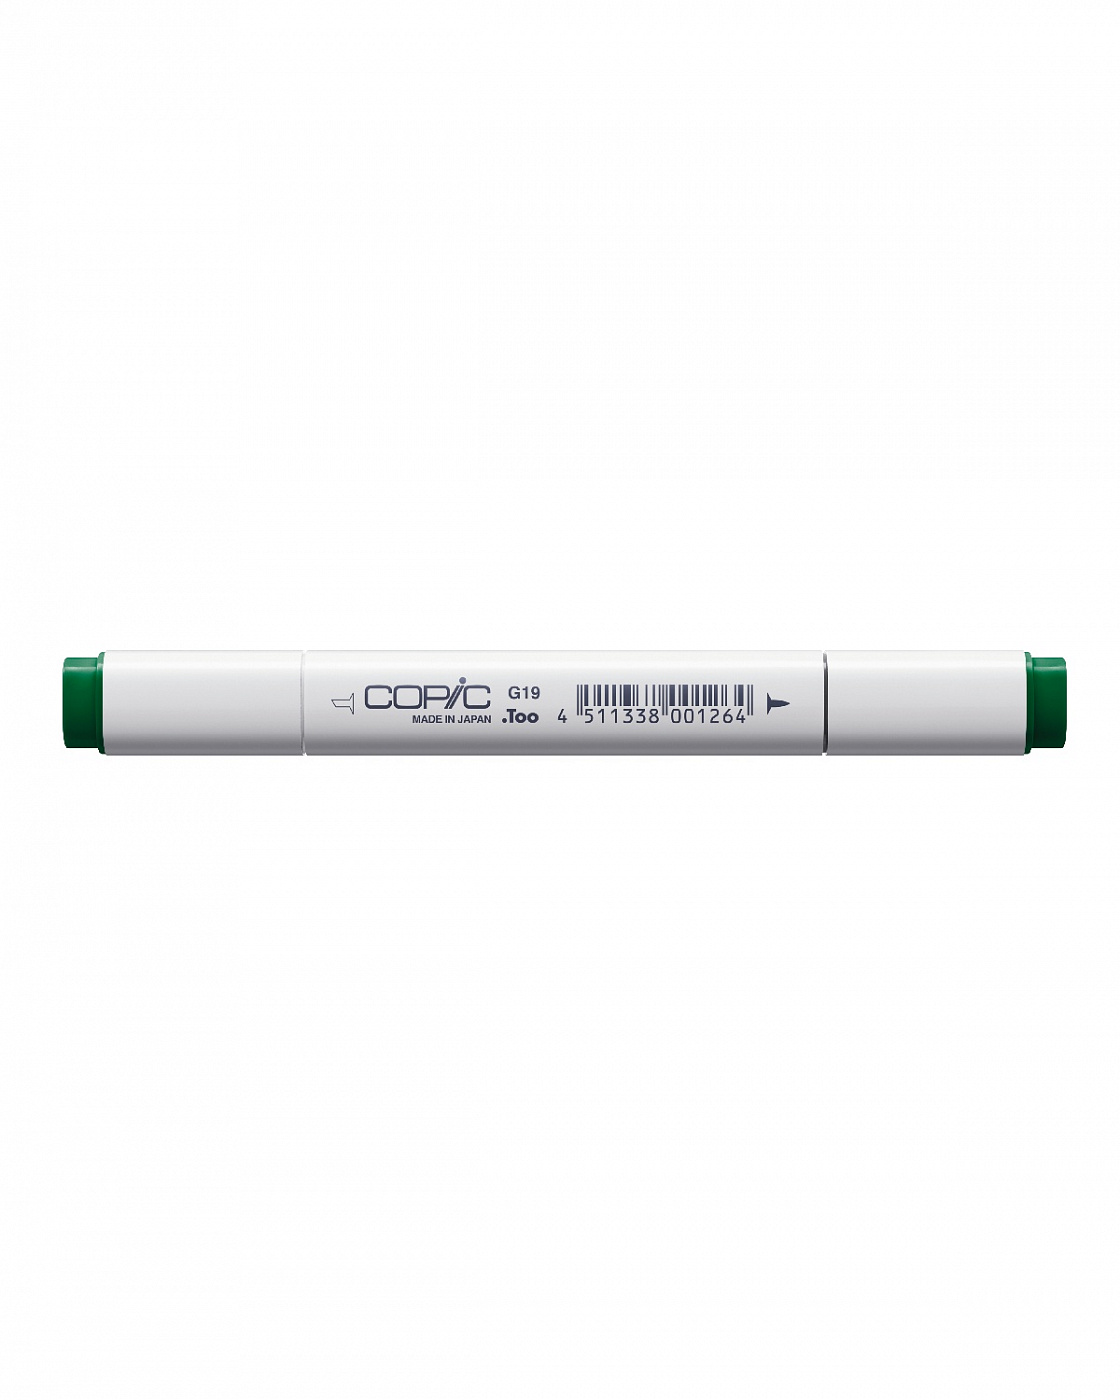  COPIC G19 (- , bright parrot green)